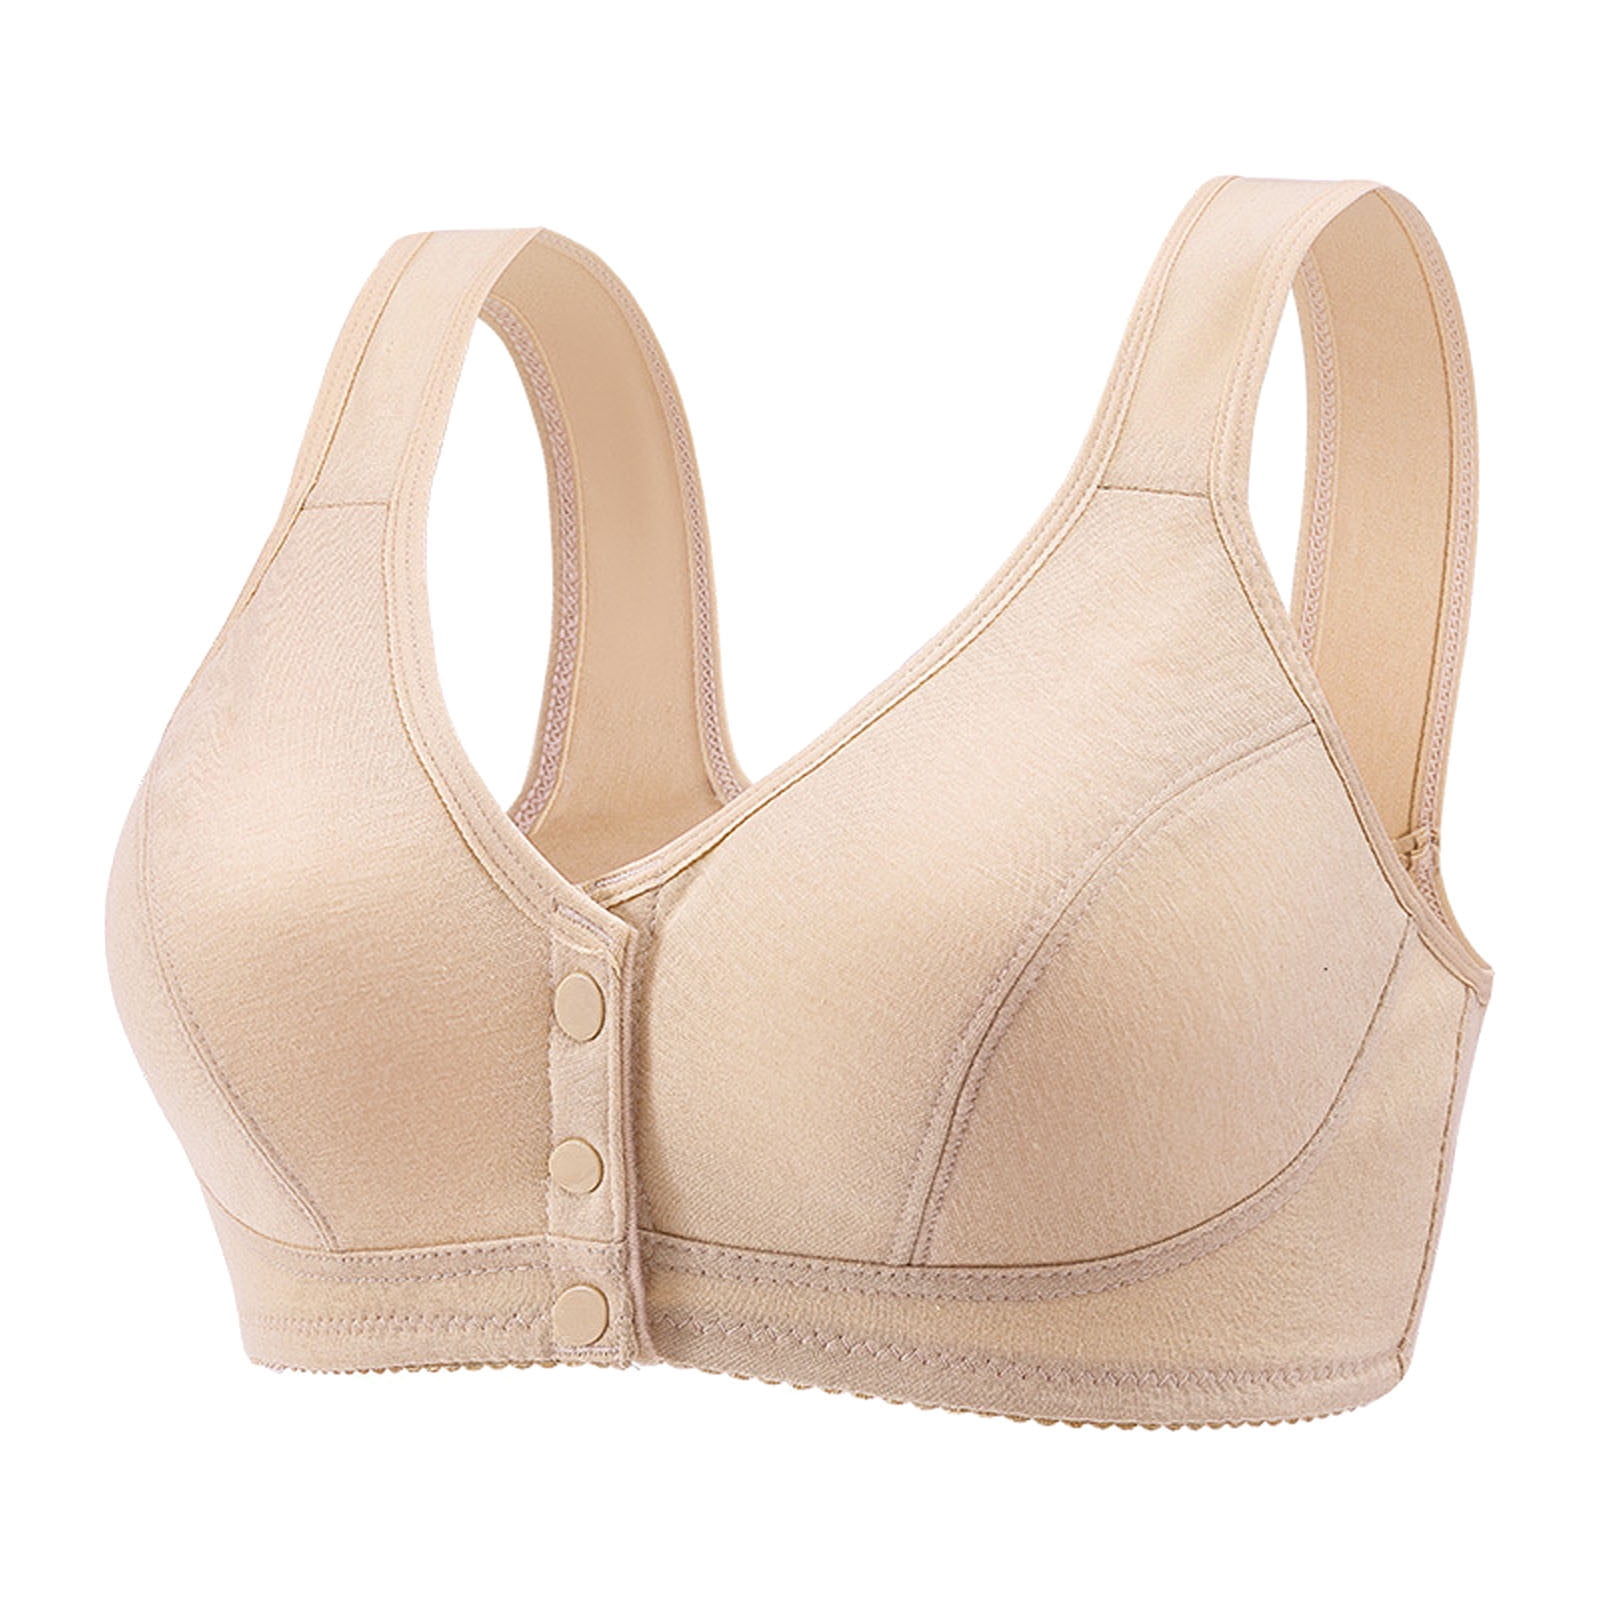 Bigersell Sports Bra for Womens Adjustment Full Cup No Underwire Cotton  Breathable Underwear Tall Size Padded Strappy Sports Bras, Style 3060,  Beige